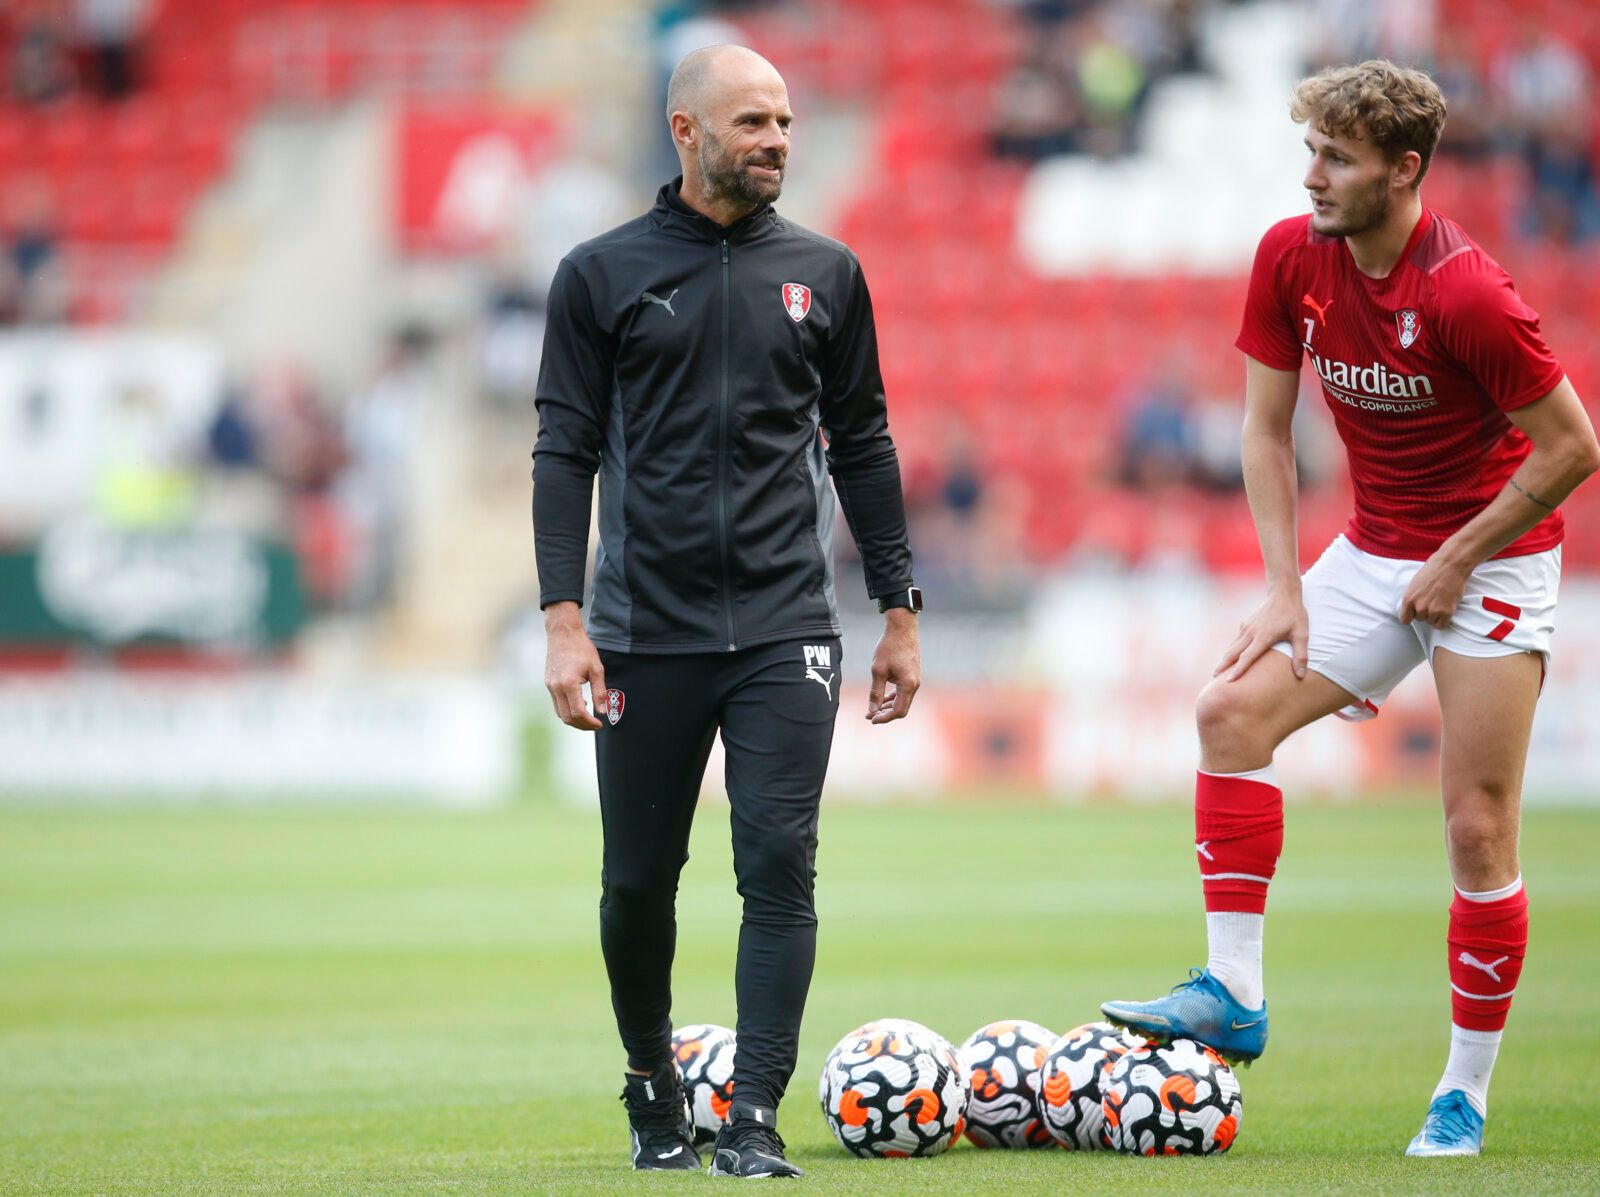 Soccer Football - Pre Season Friendly - Rotherham United v Newcastle United - AESSEAL New York Stadium, Rotherham, Britain - July 27, 2021 Rotherham United manager Paul Warne with Kieran Sadlier before the match Action Images via Reuters/Ed Sykes